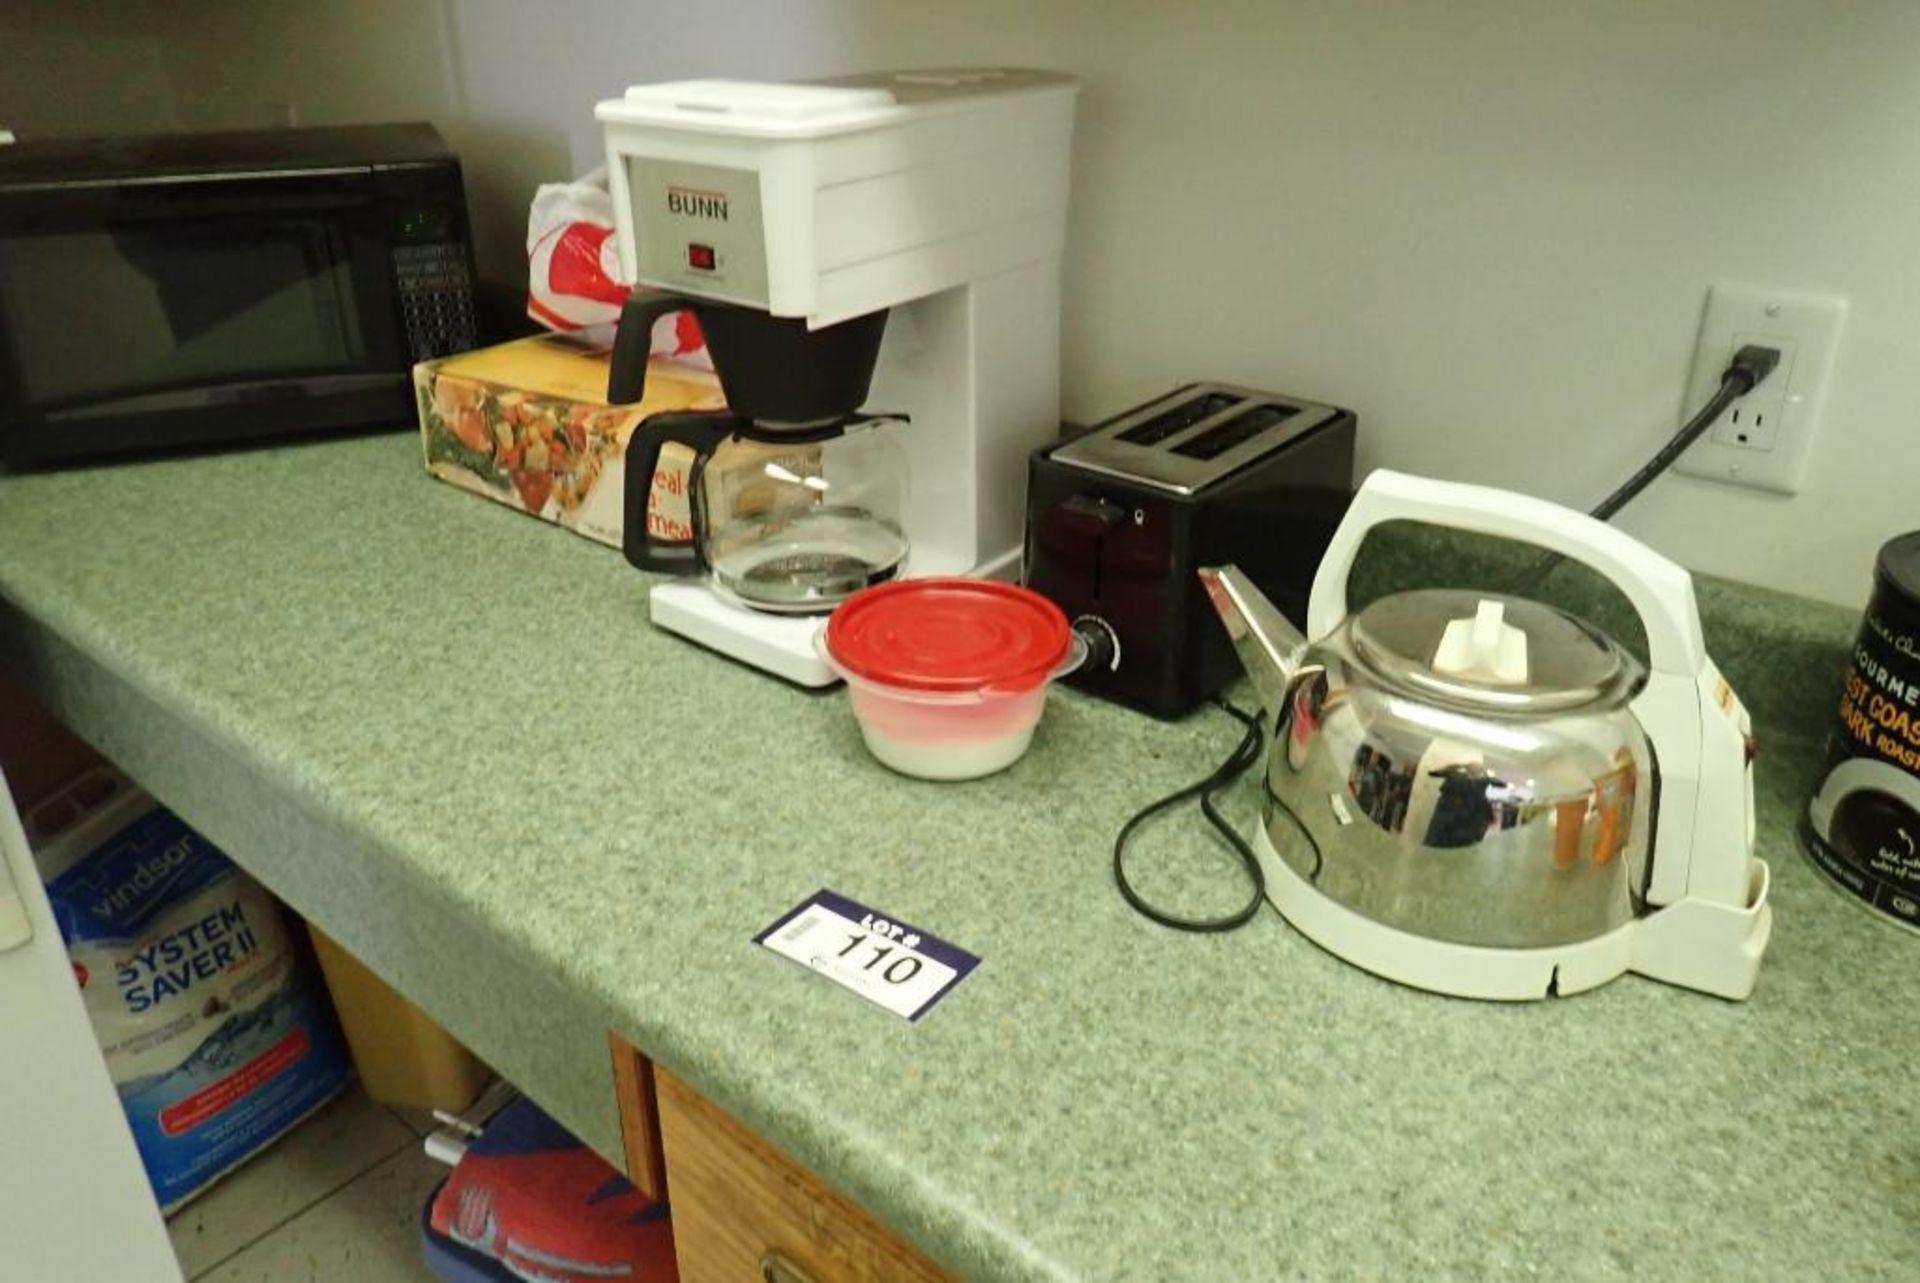 Lot of Microwave, Toaster, Coffee Maker, Kettle, etc.